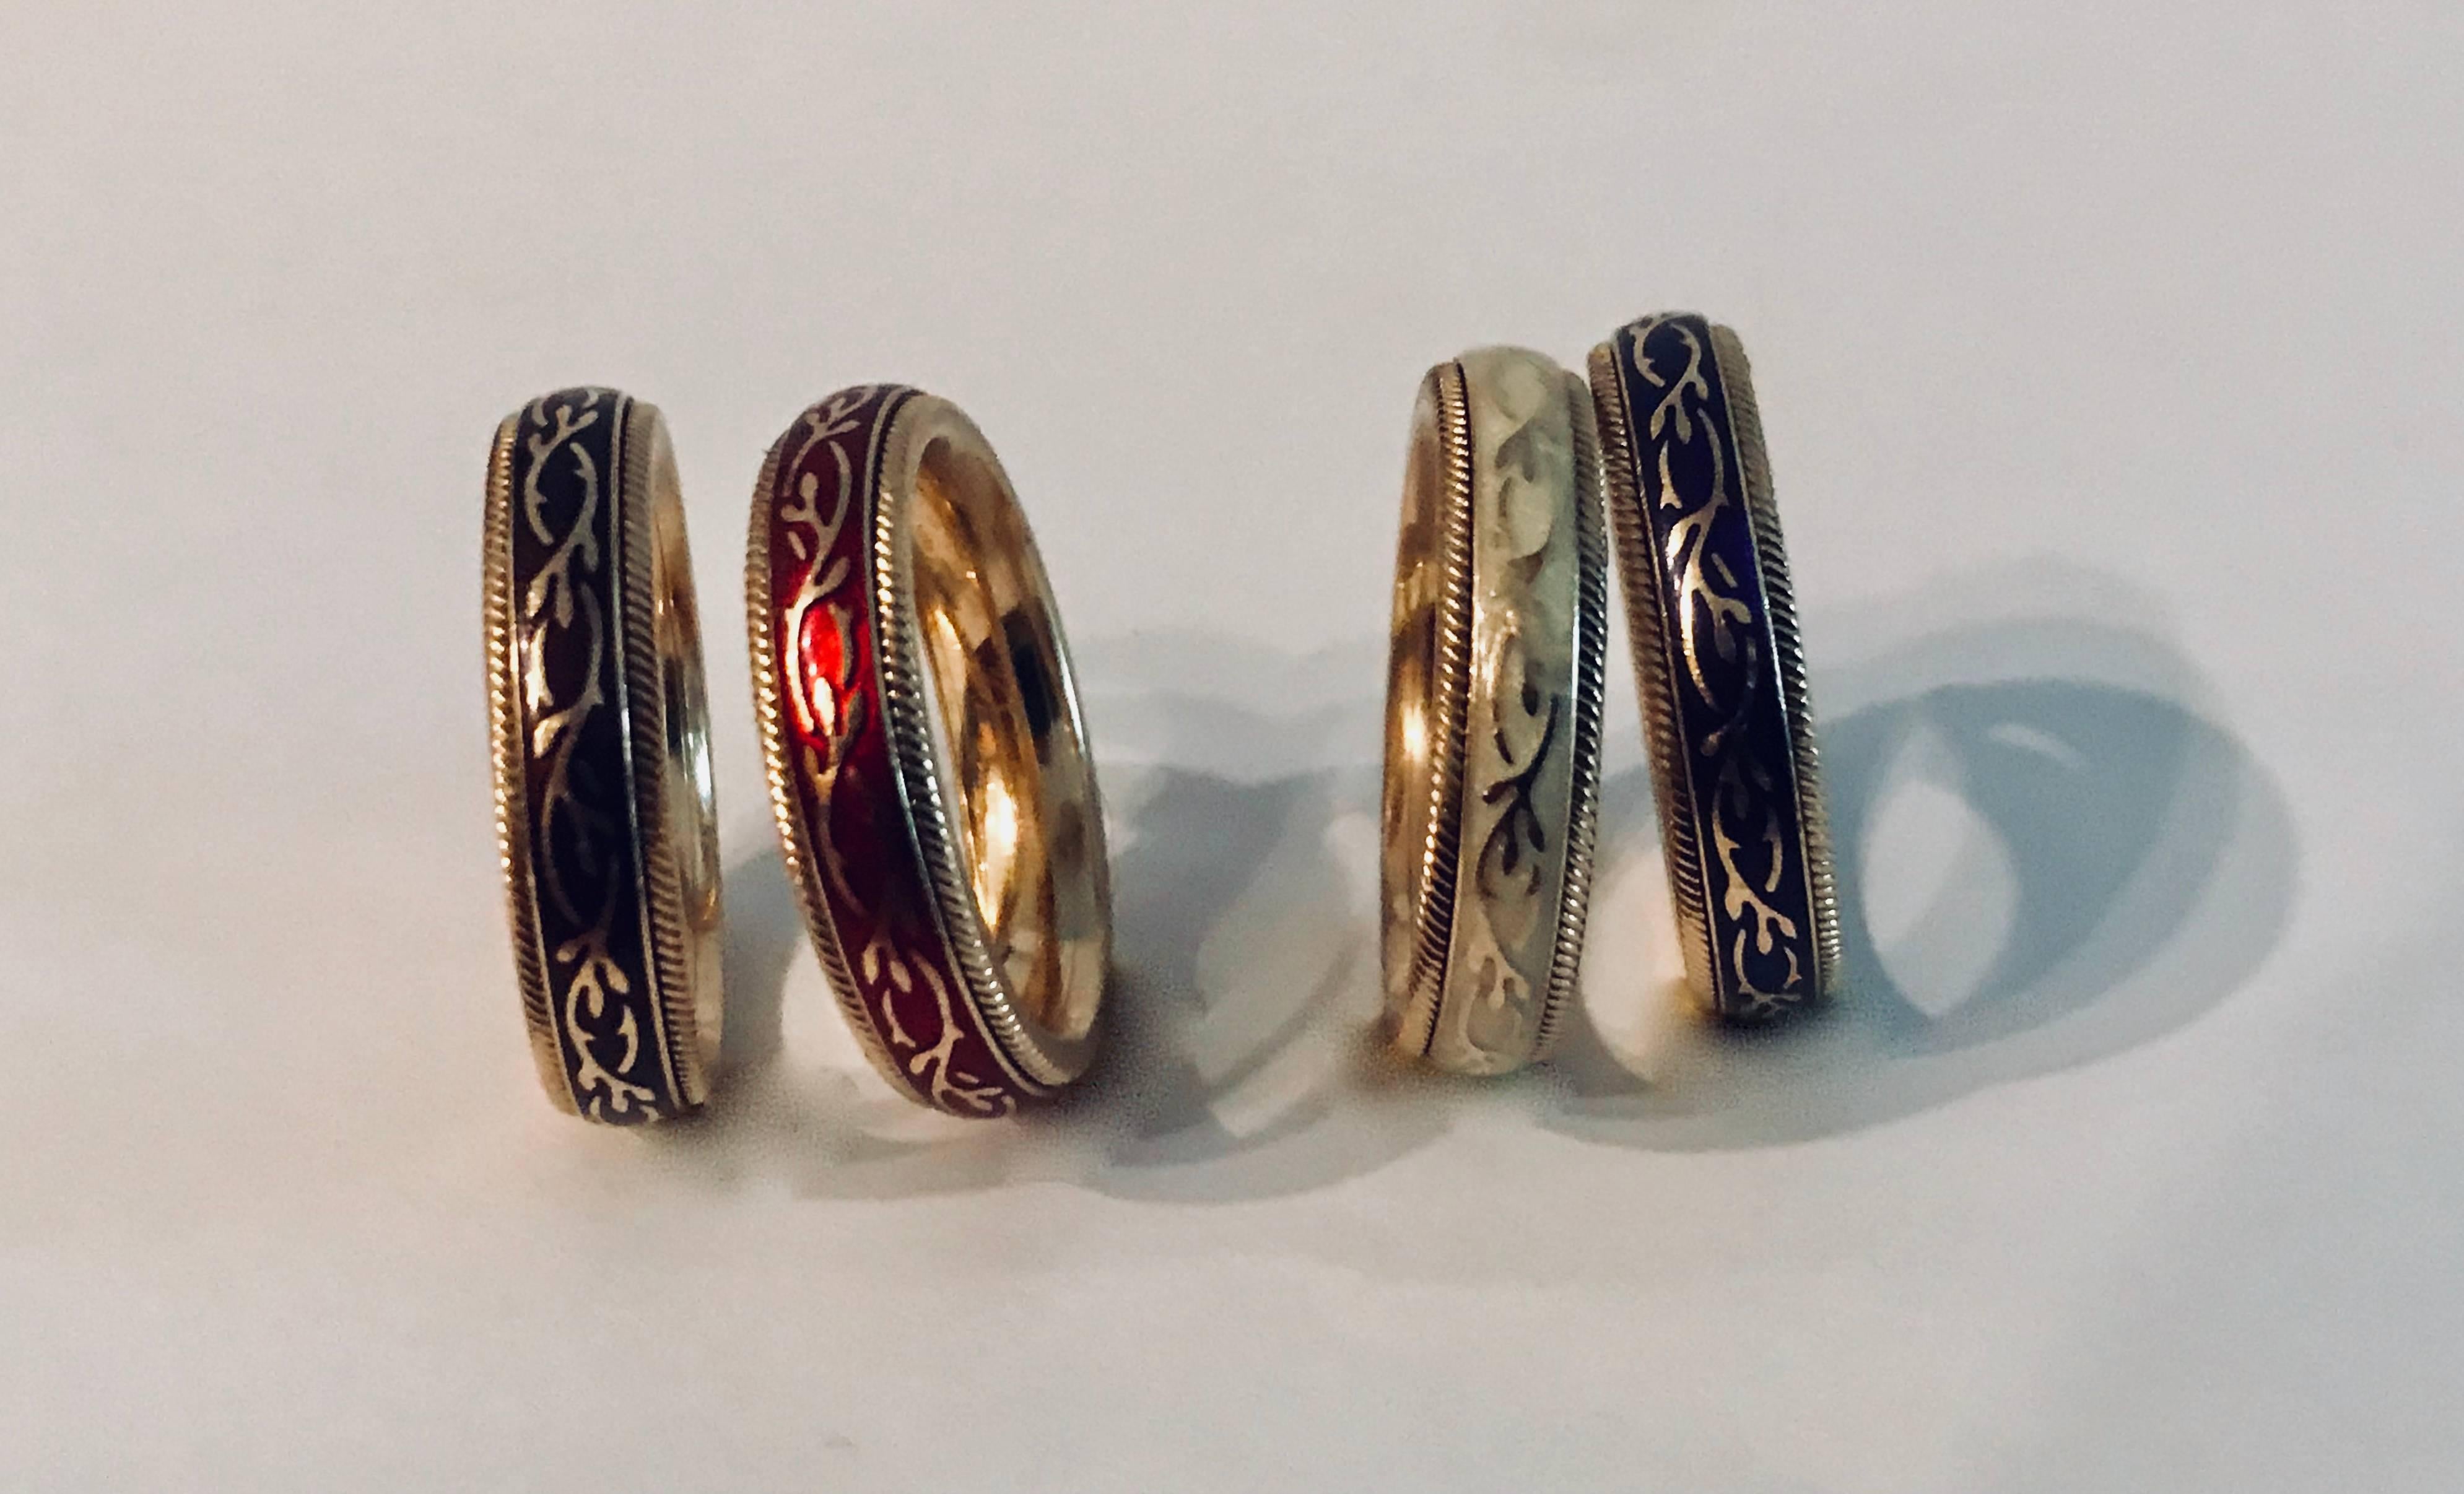 Wellendorff 18K yellow gold set of enamel stackable rings. The rings can be bought as a set or individually.
Each ring $ 1,980.00
Size 6 1/2
Can not be sized
